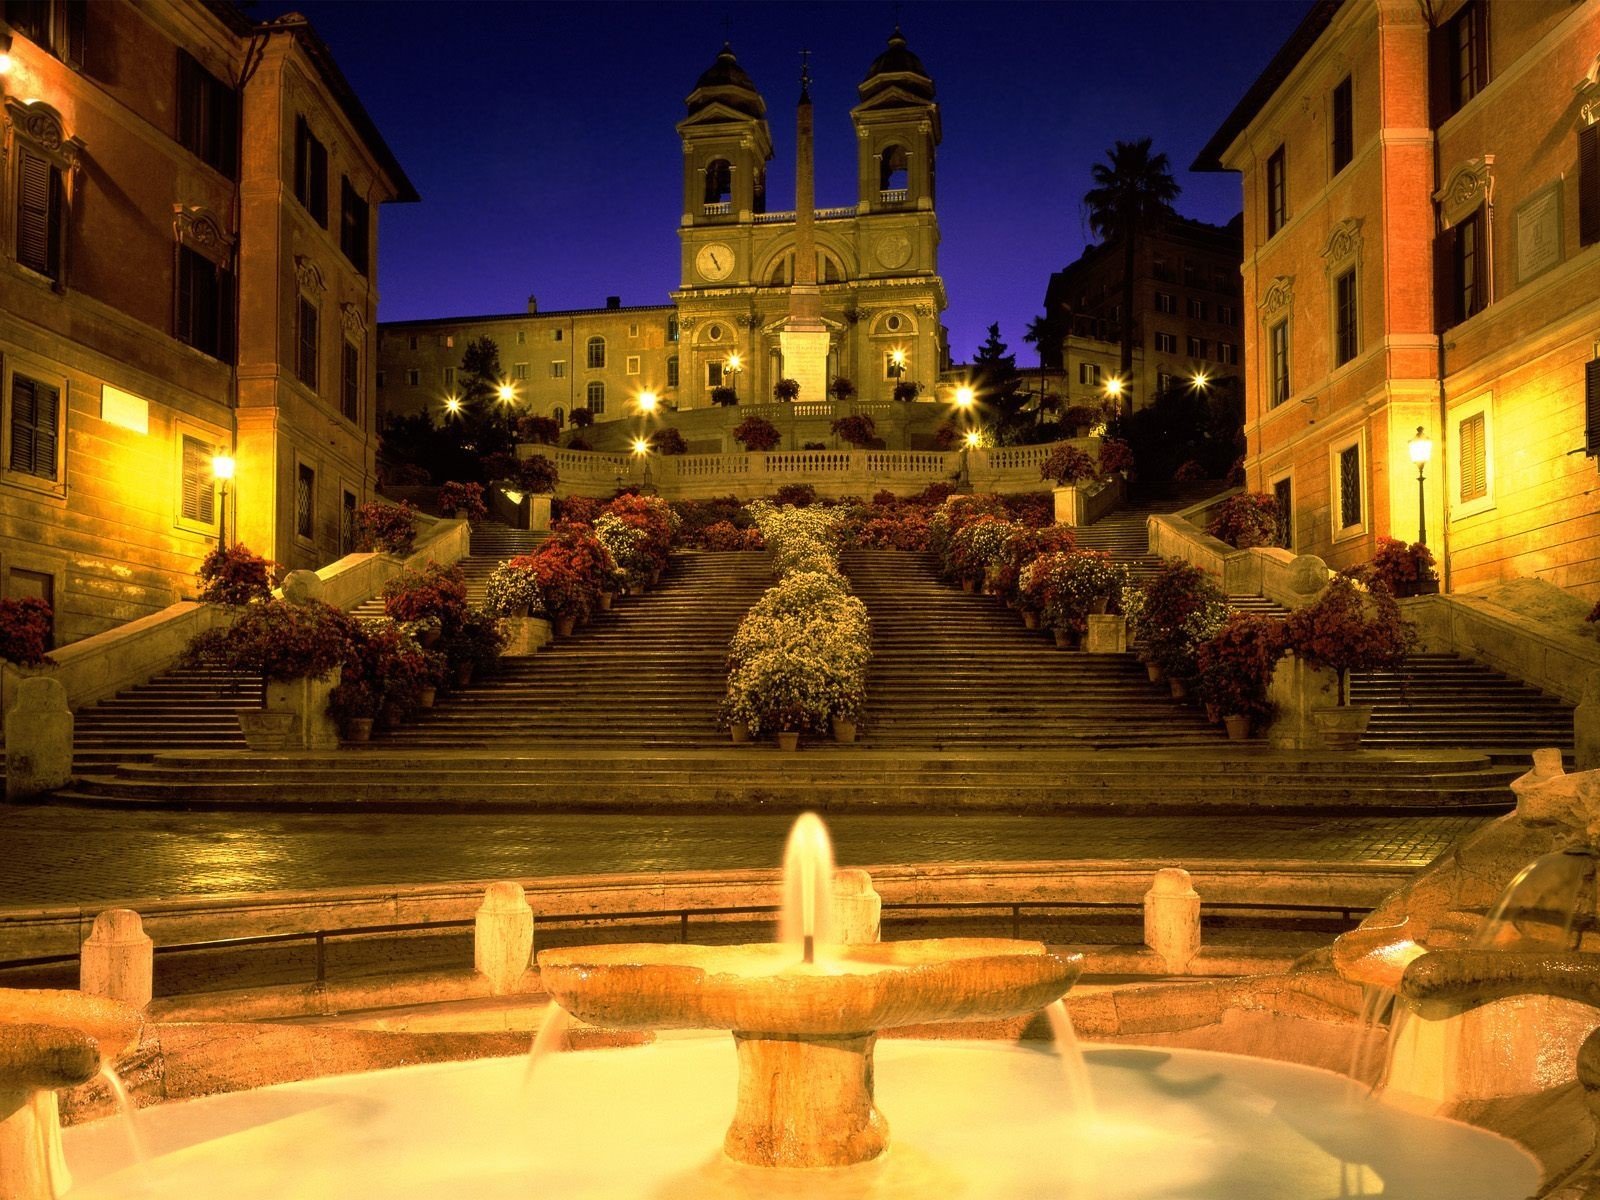 Italy, Rome, Church, Stairs, Fountain, Evening, Lights, Street light, City, Piazza di Spagna Wallpaper